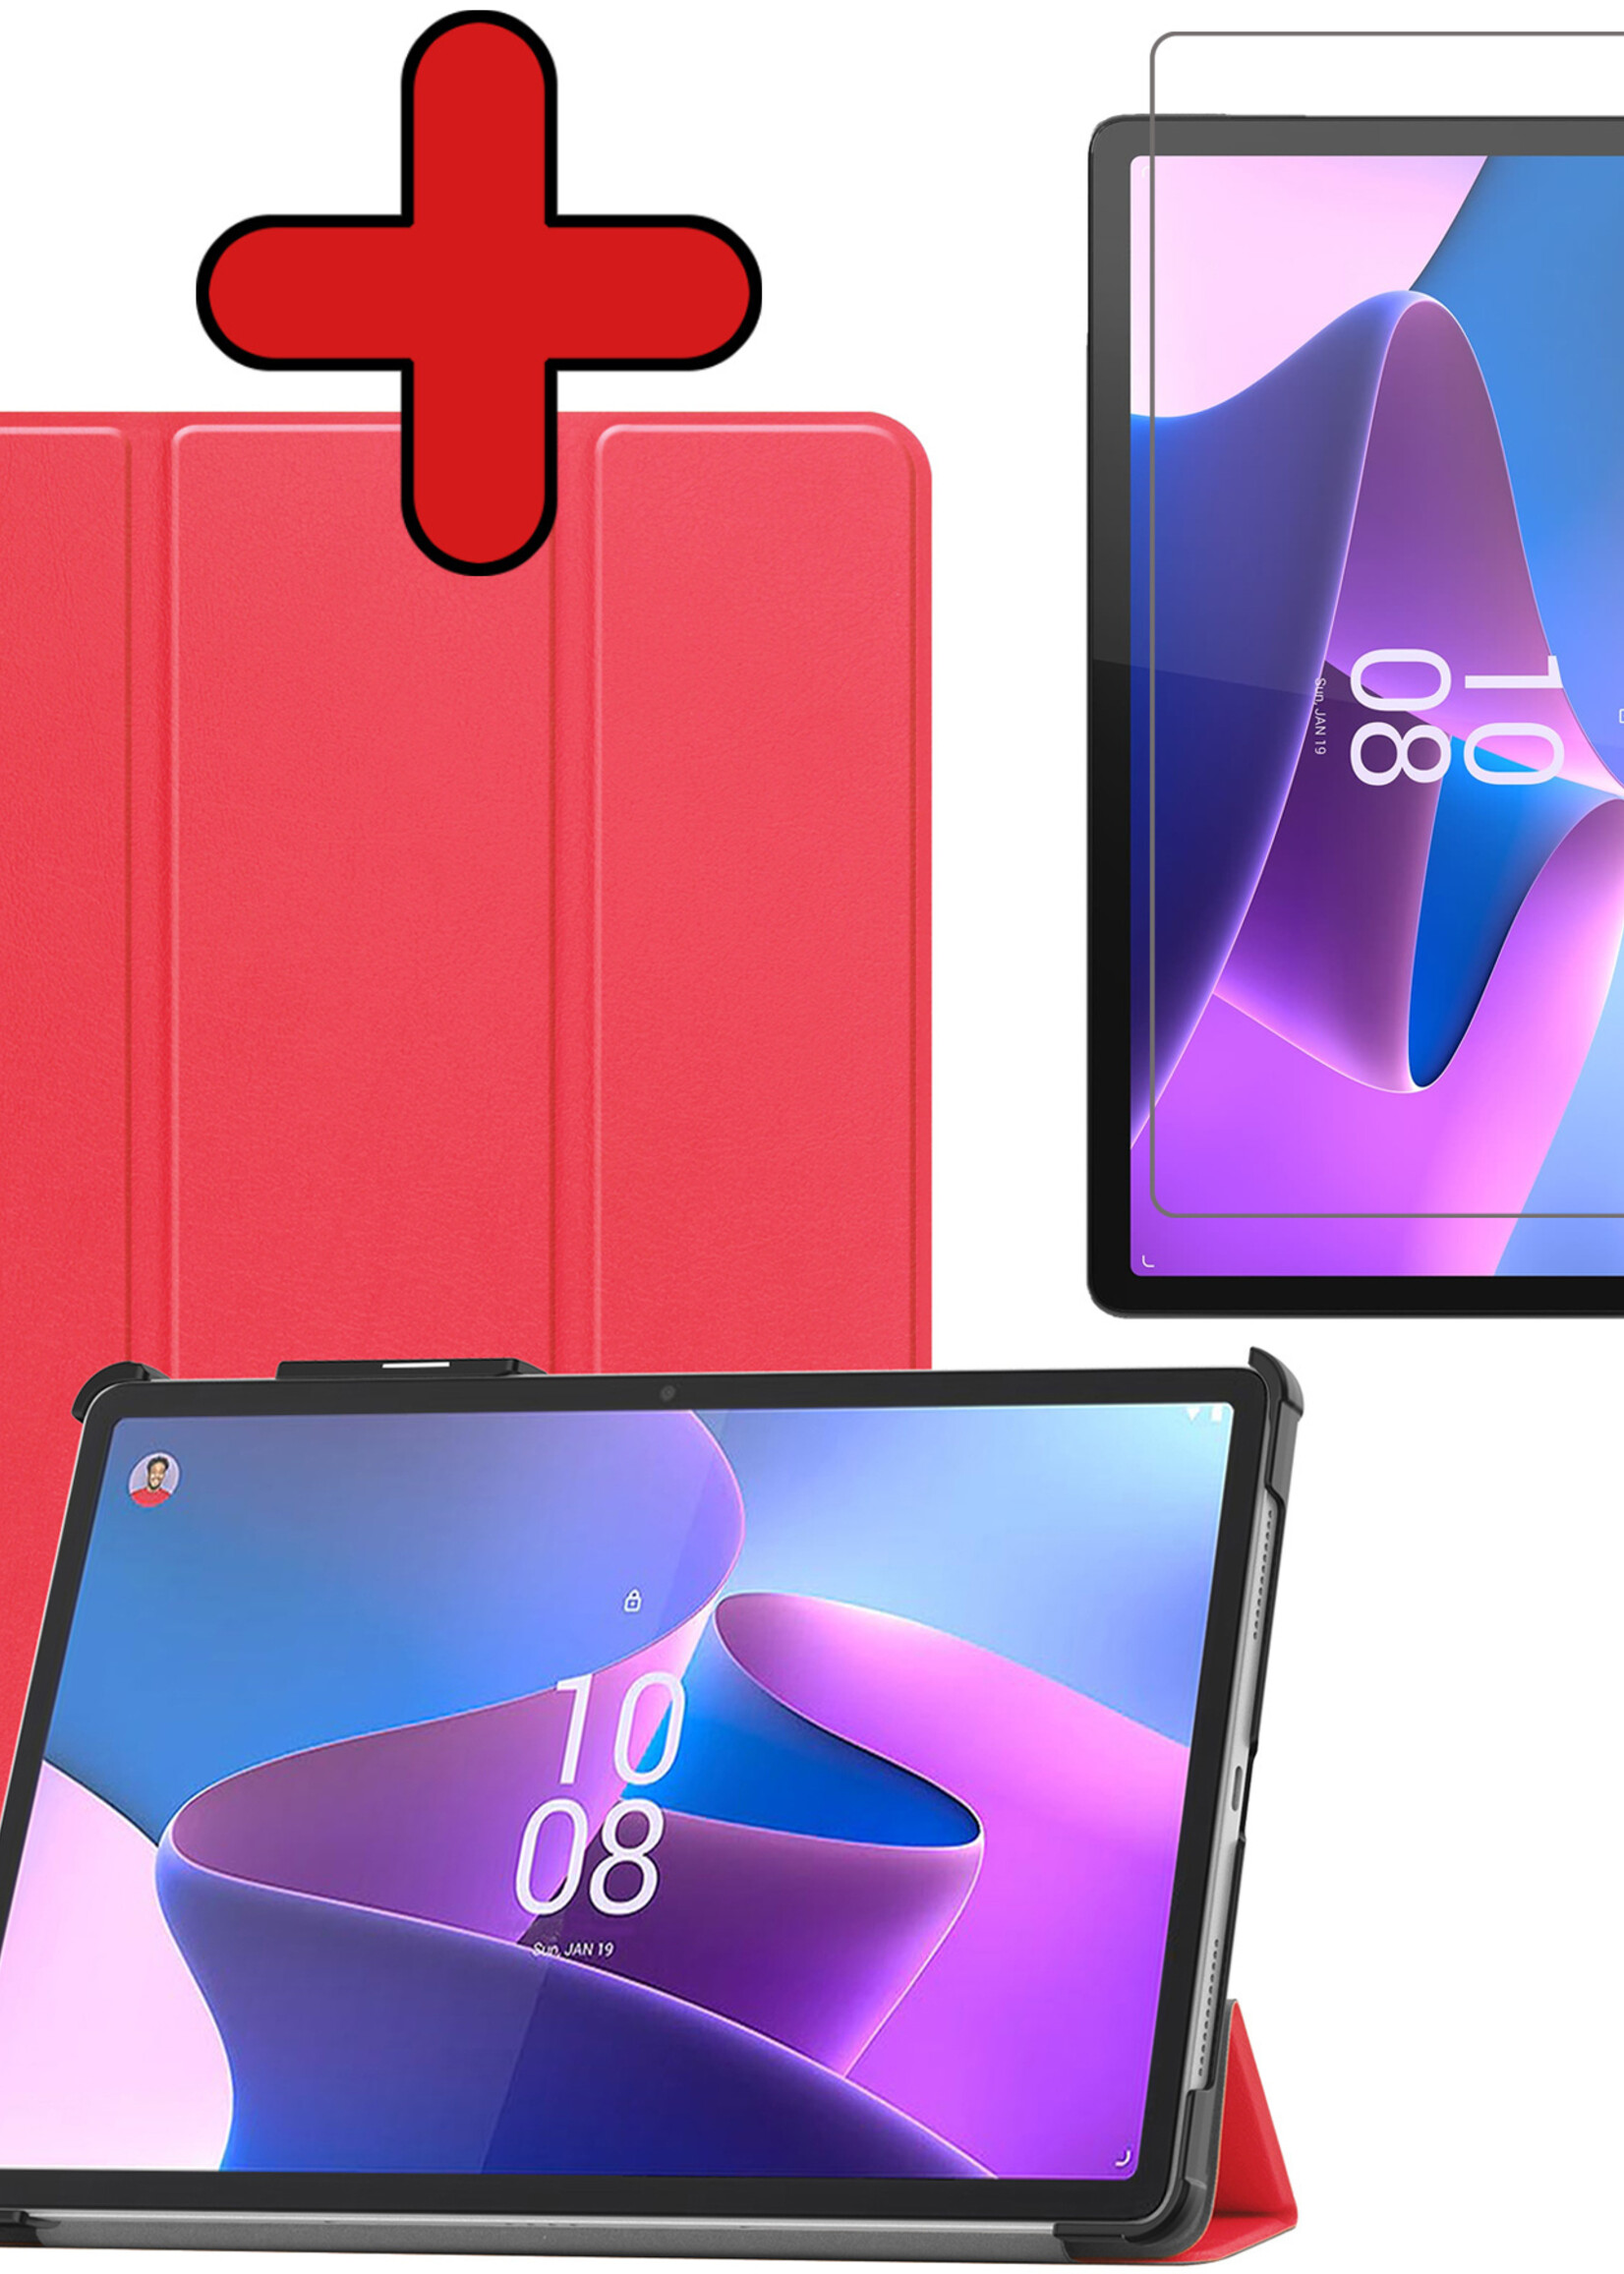 BTH Hoes Geschikt voor Lenovo Tab P11 Pro Hoes Book Case Hoesje Trifold Cover Met Uitsparing Geschikt voor Lenovo Pen Met Screenprotector - Hoesje Geschikt voor Lenovo Tab P11 Pro Hoesje Bookcase - Rood